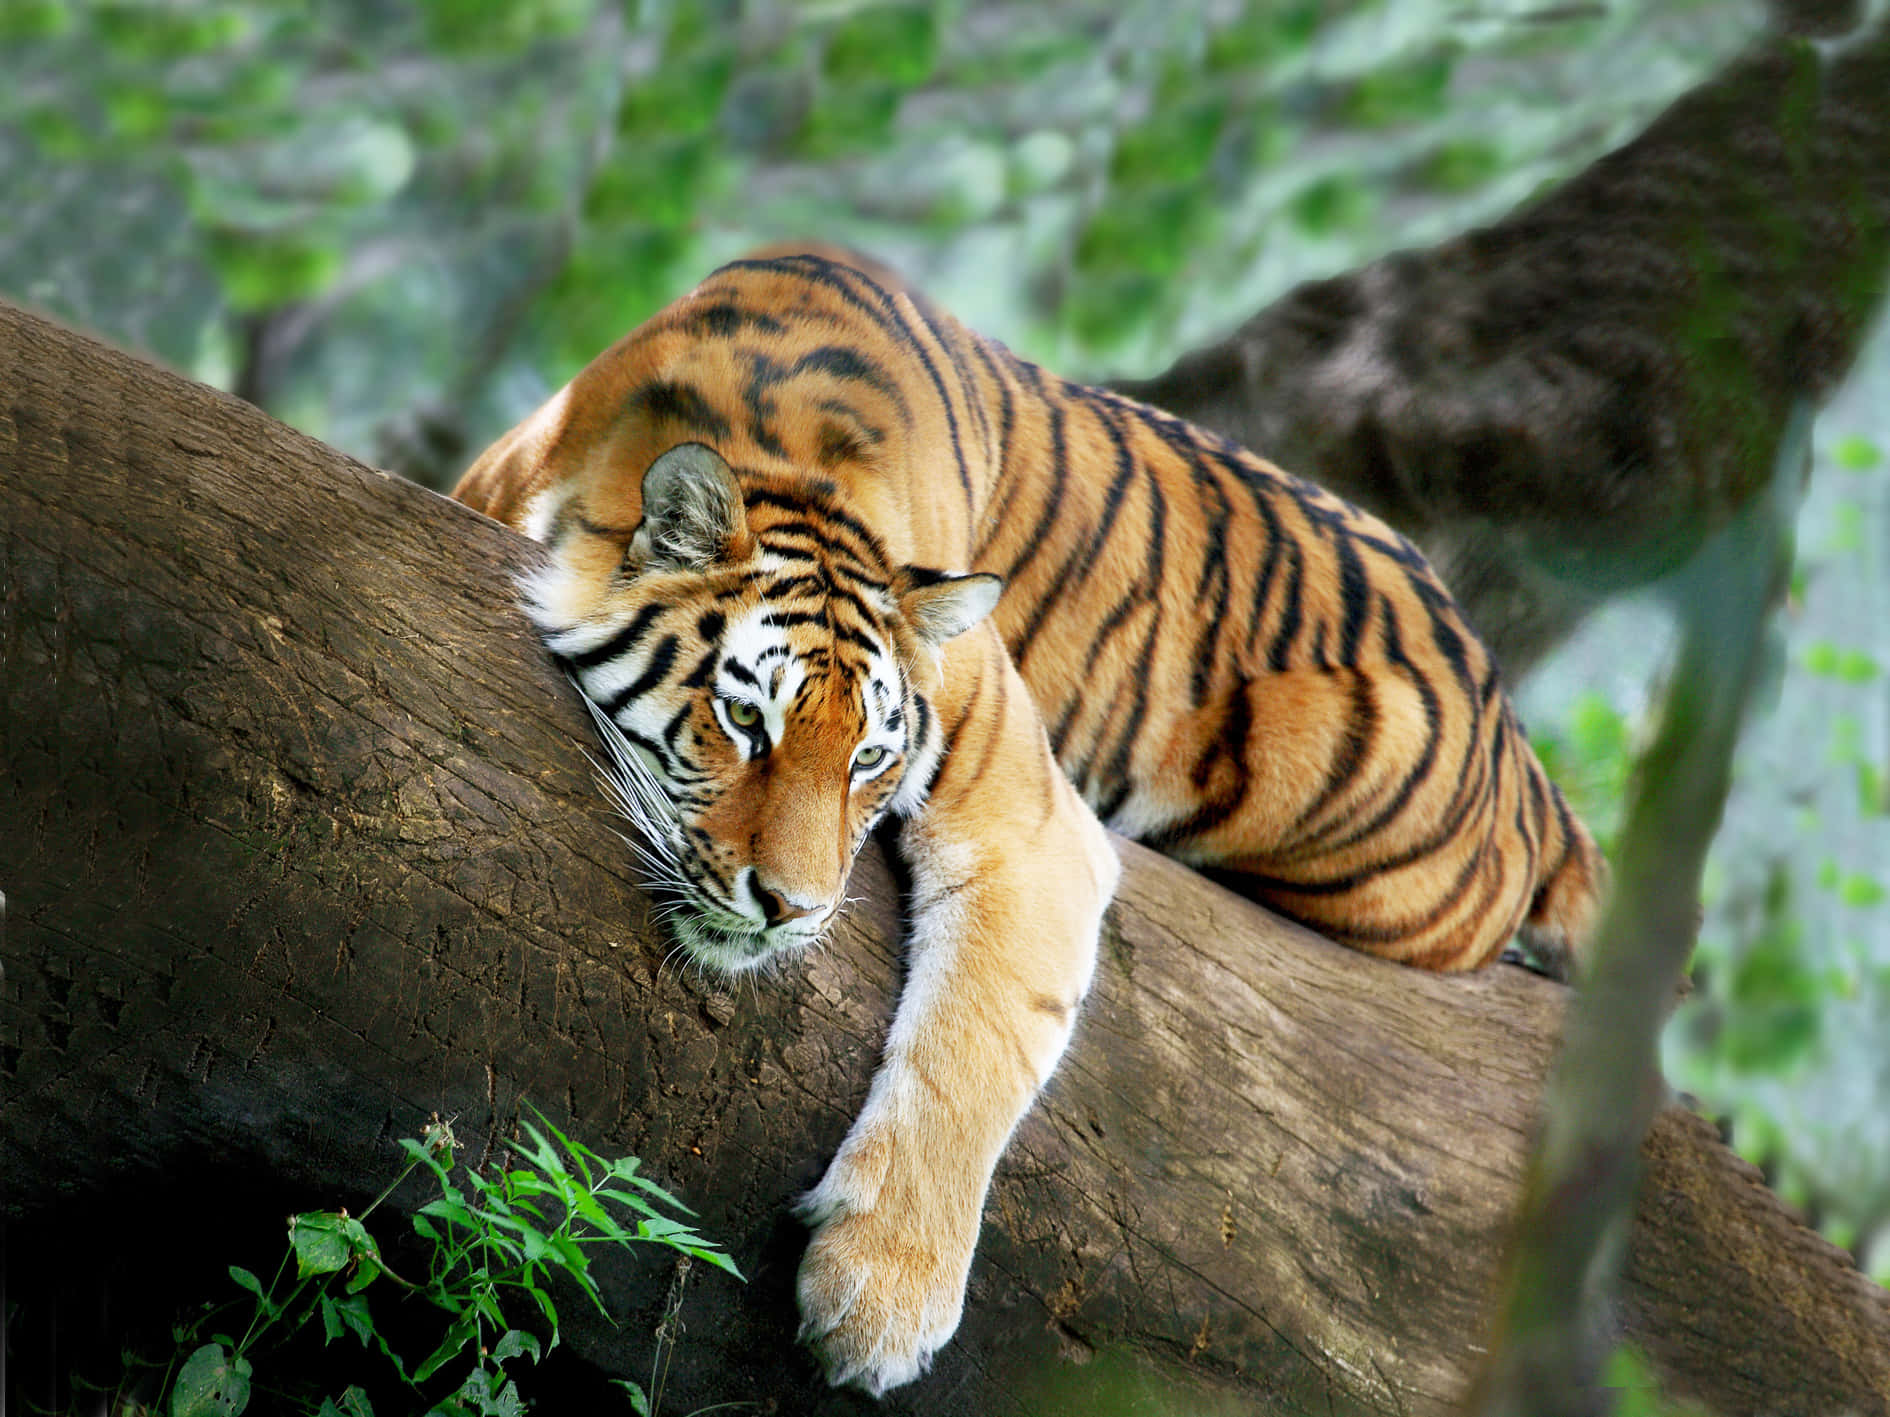 A beautiful Tiger lounging in the sun